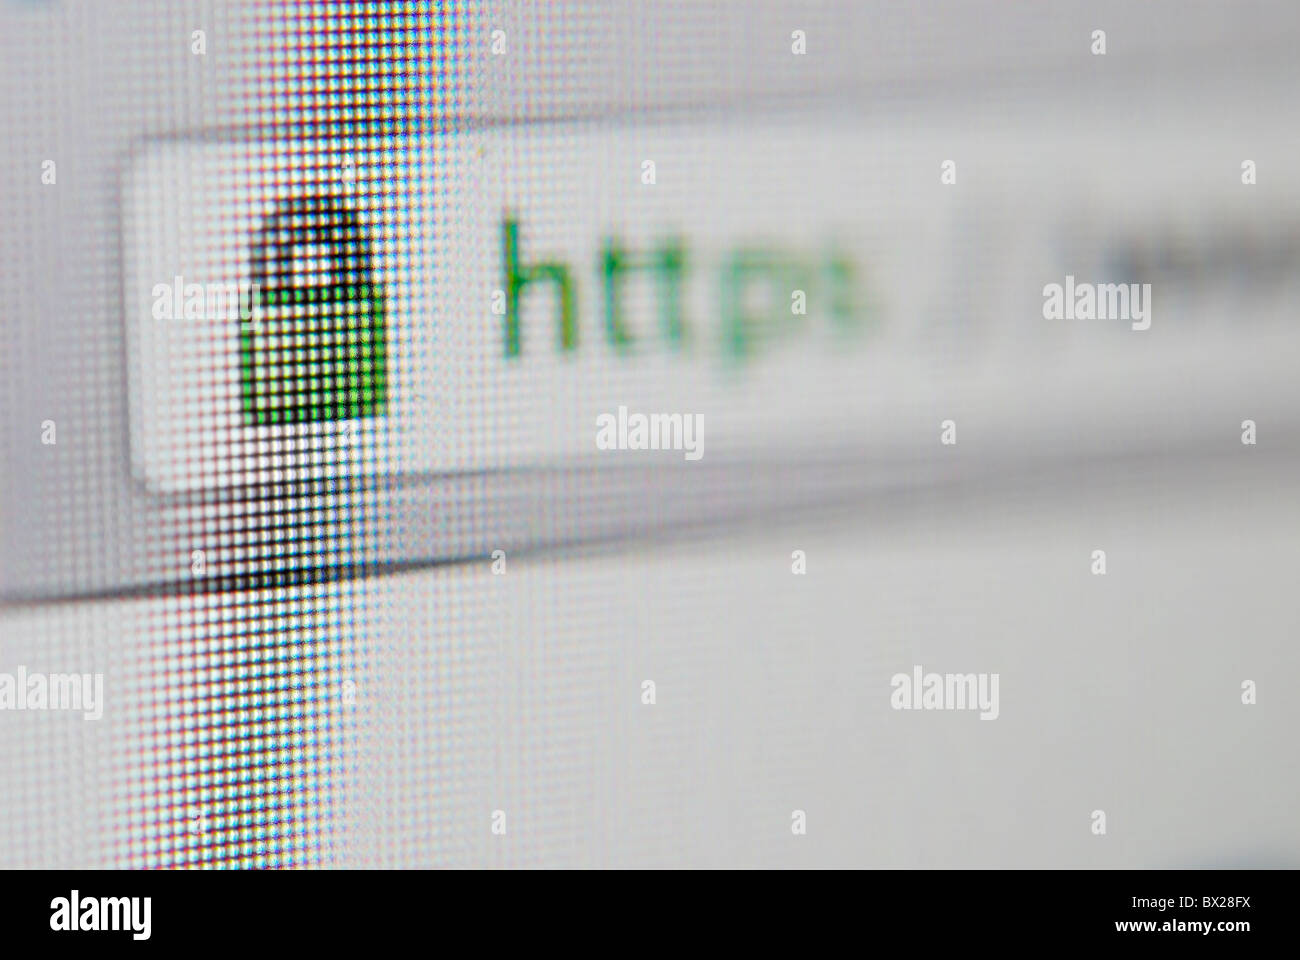 Website using an encryption protocol for security and privacy Stock Photo